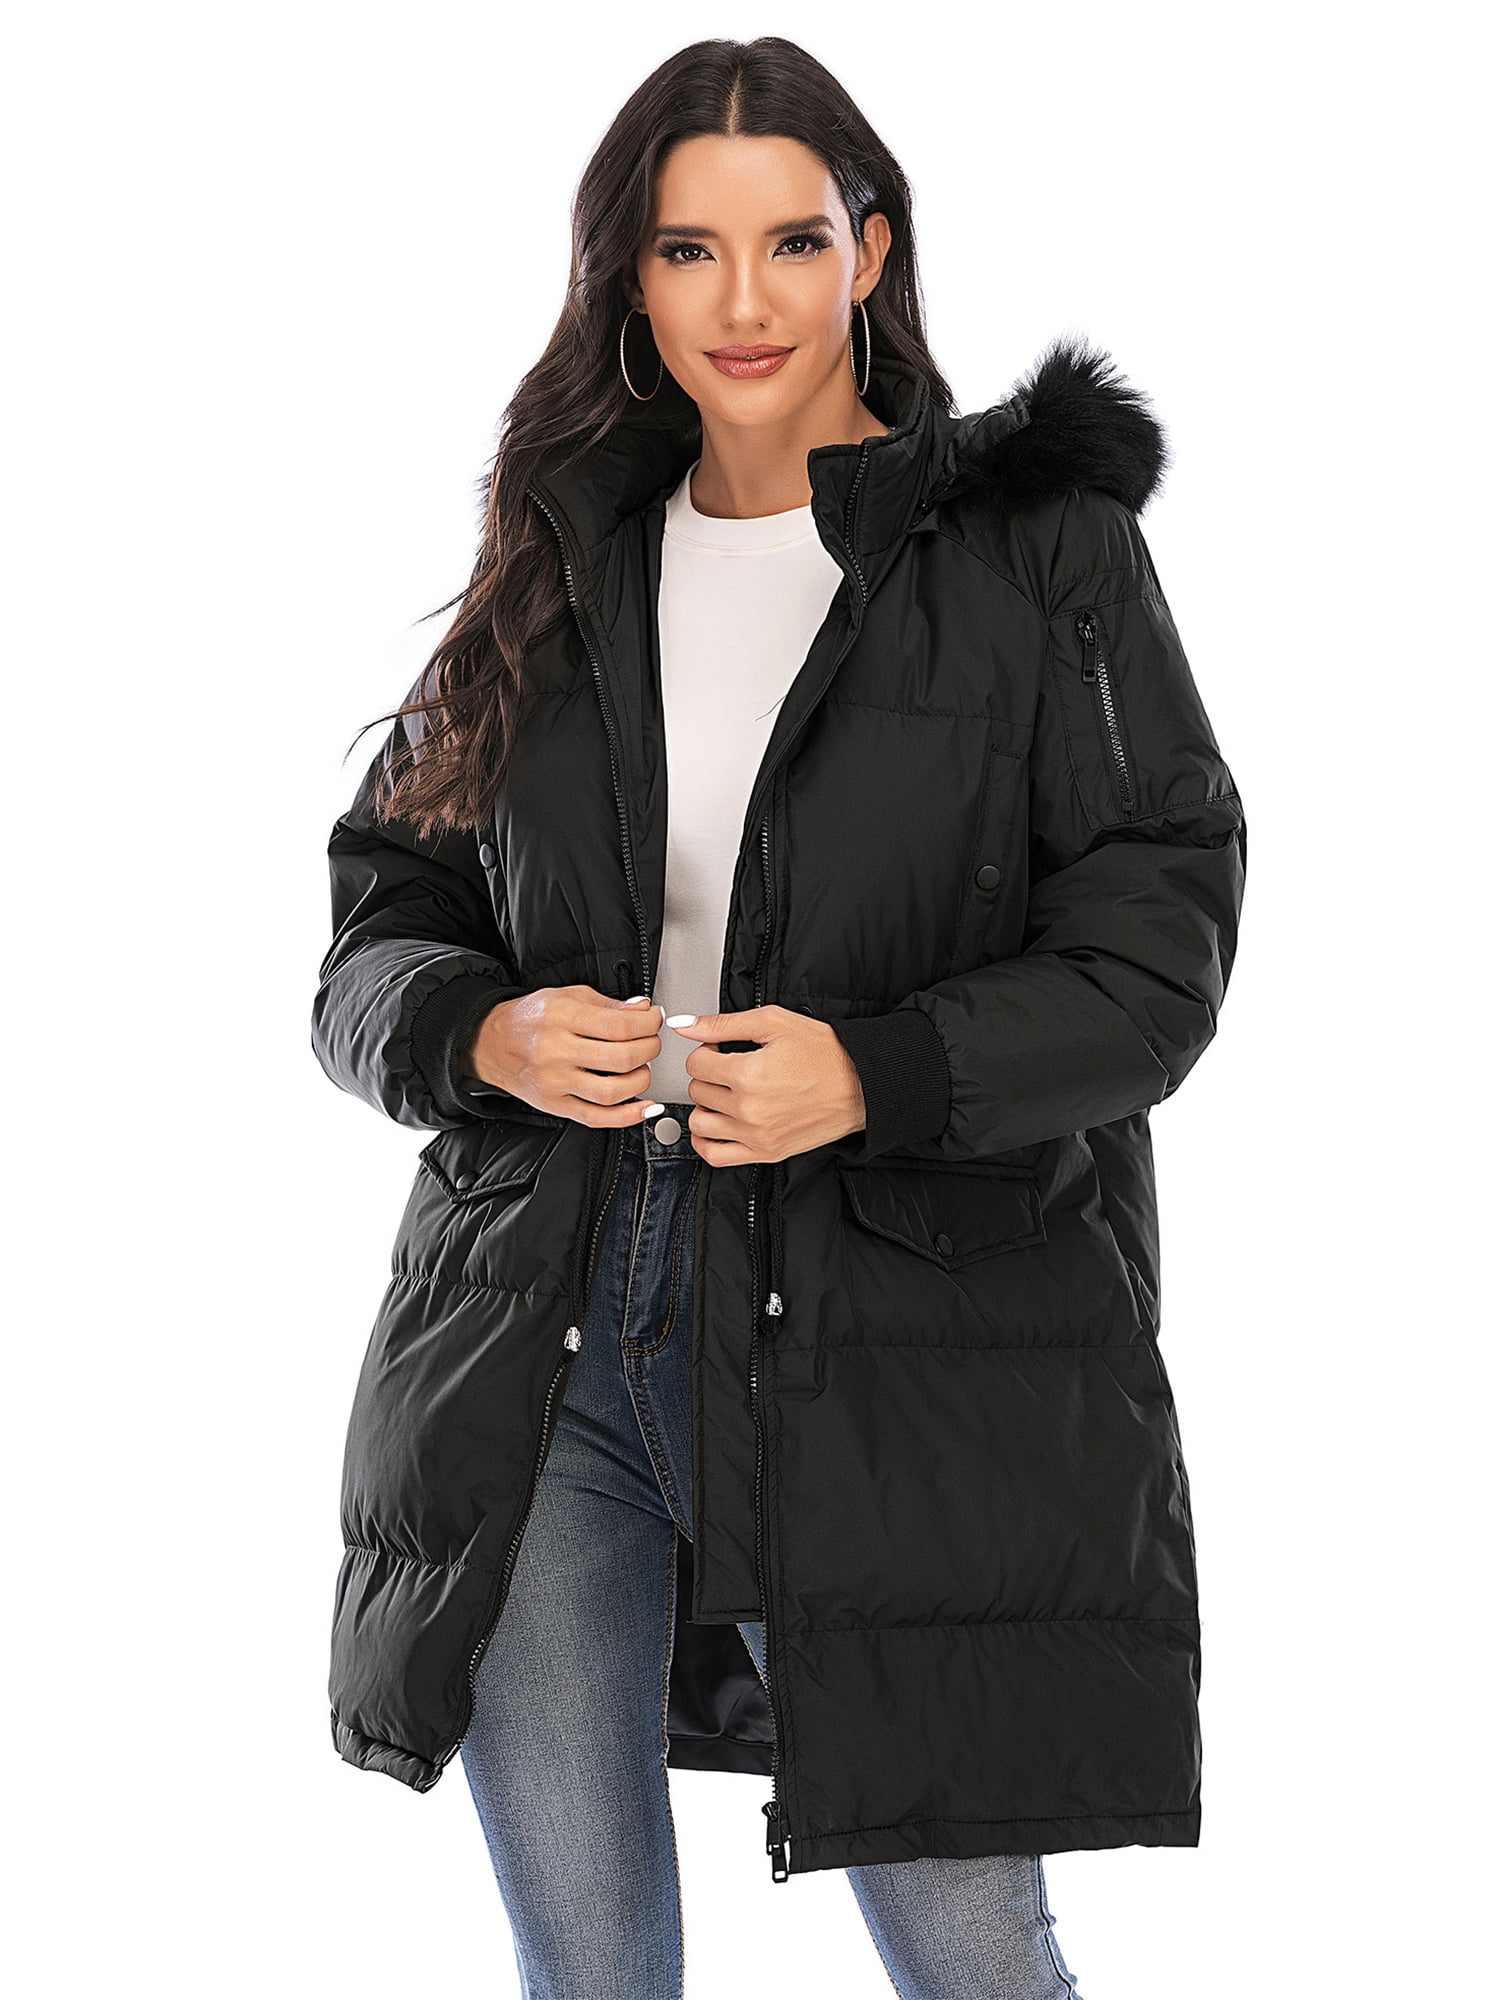 BAG WIZARD - Women's Hooded Thickened Down Jacket Long Winter Parka ...